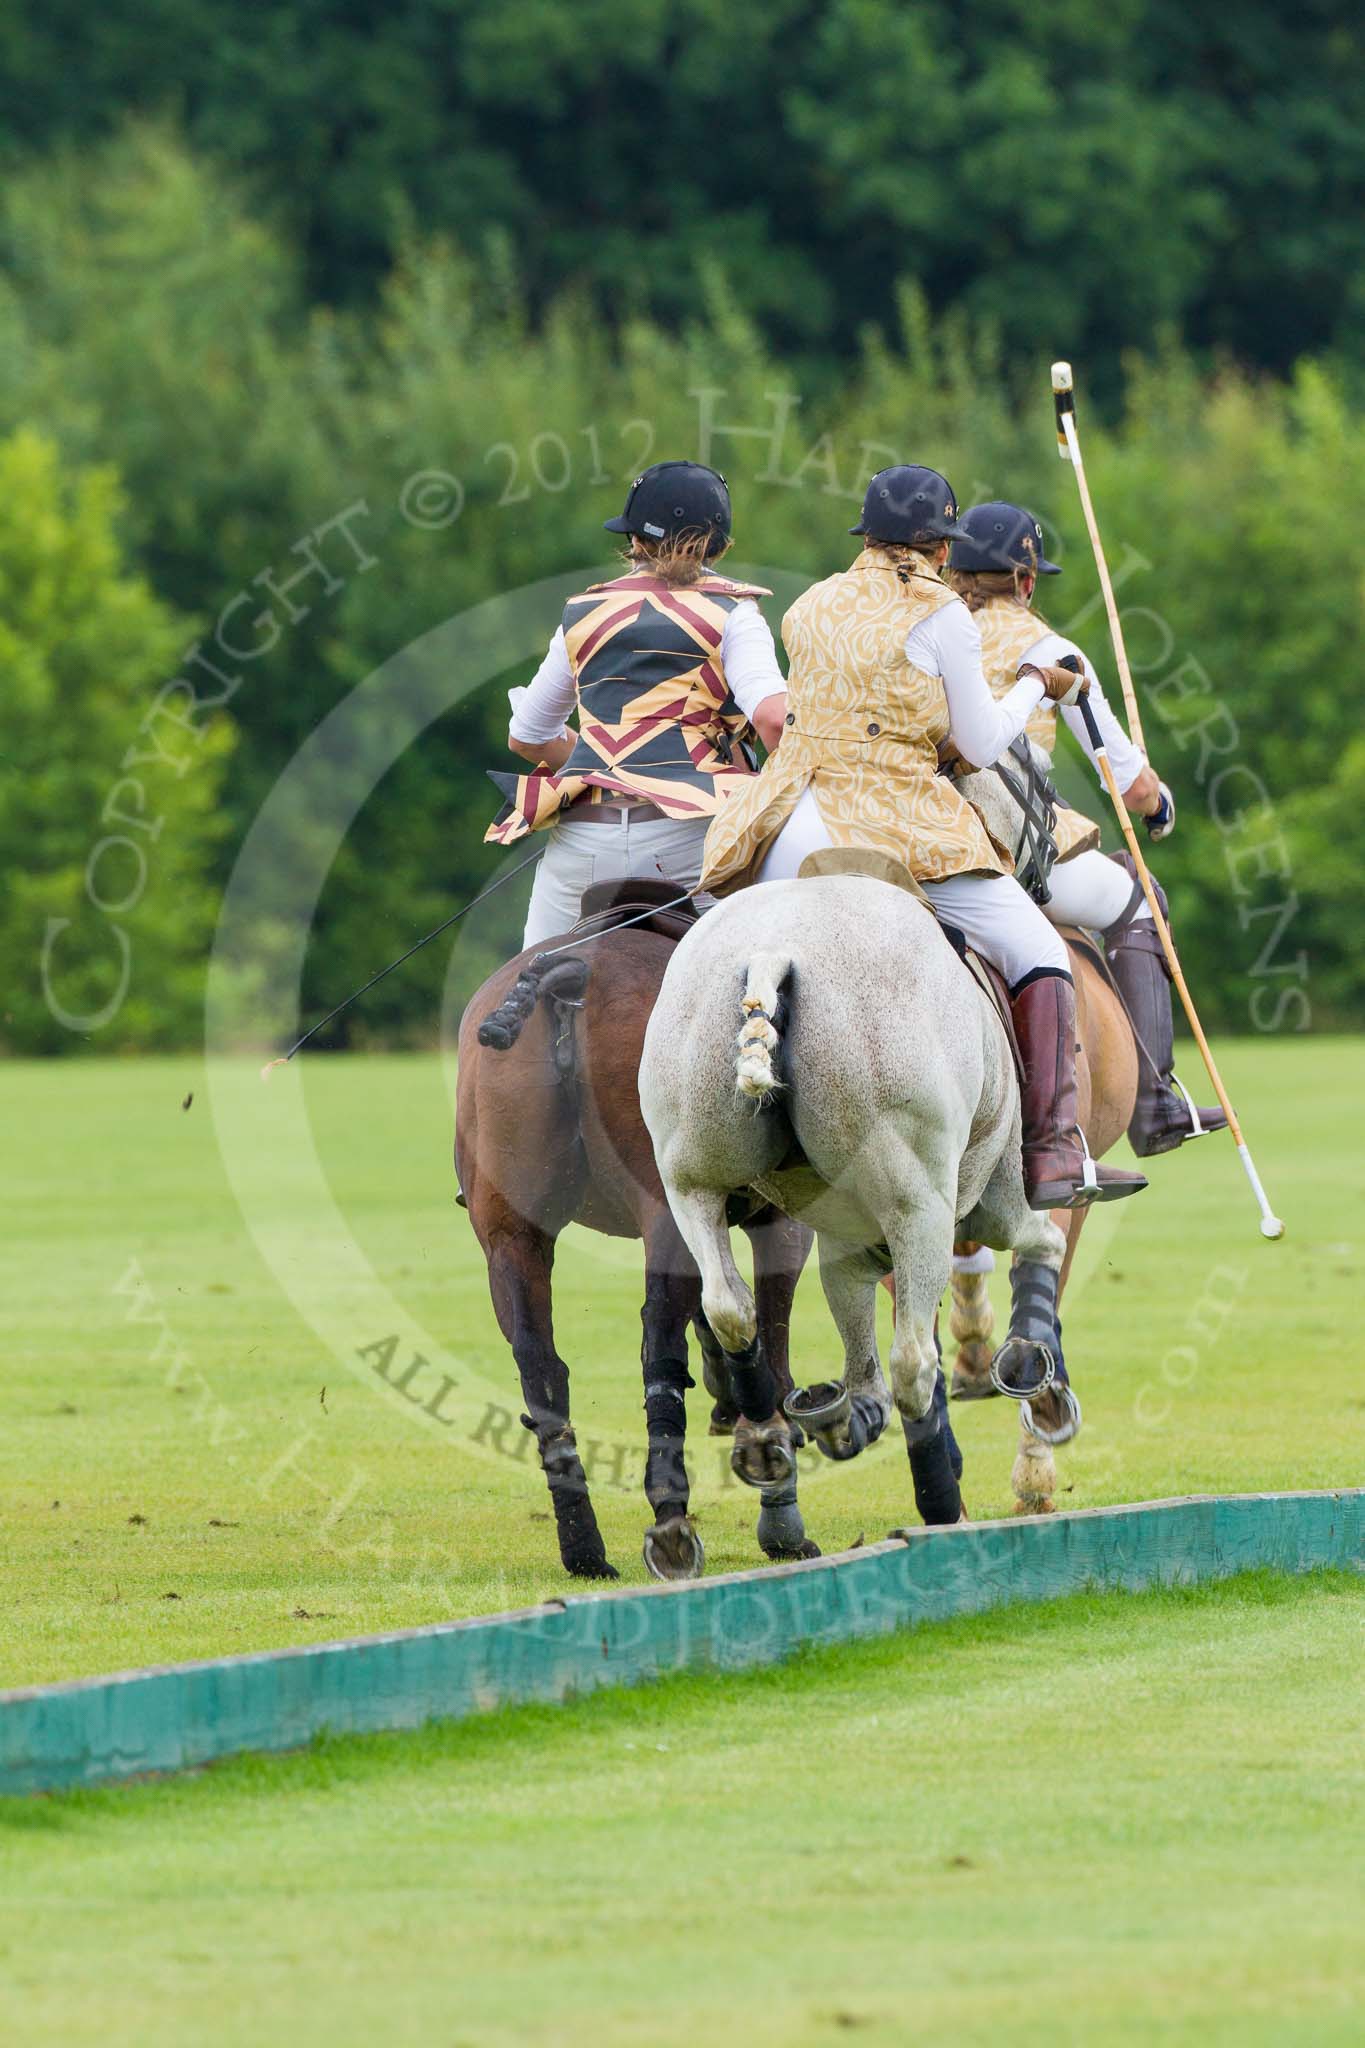 7th Heritage Polo Cup semi-finals: Heading to goal Rosie Ross & Barbara P Zingg..
Hurtwood Park Polo Club,
Ewhurst Green,
Surrey,
United Kingdom,
on 04 August 2012 at 13:14, image #118